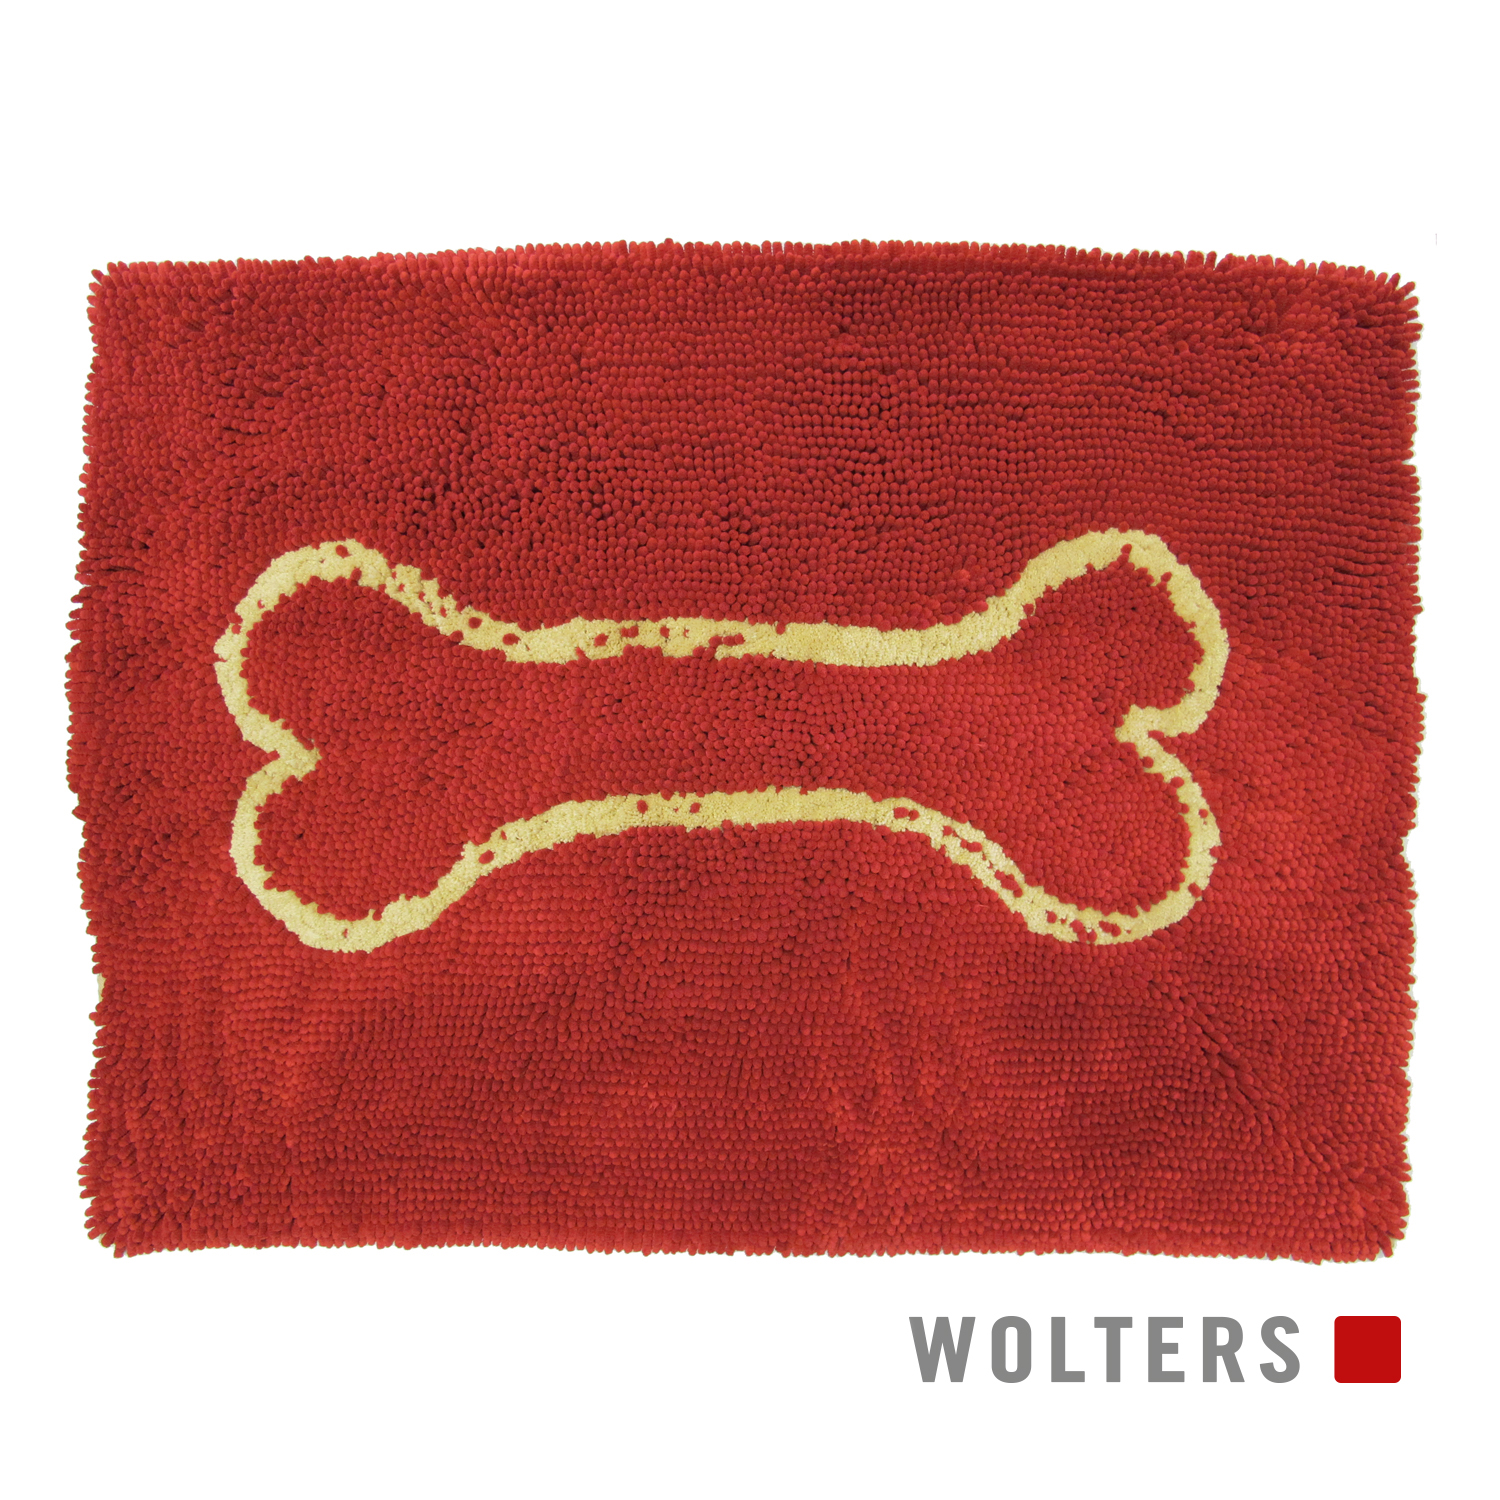 Wolters Dirty Dog Doormat - rot